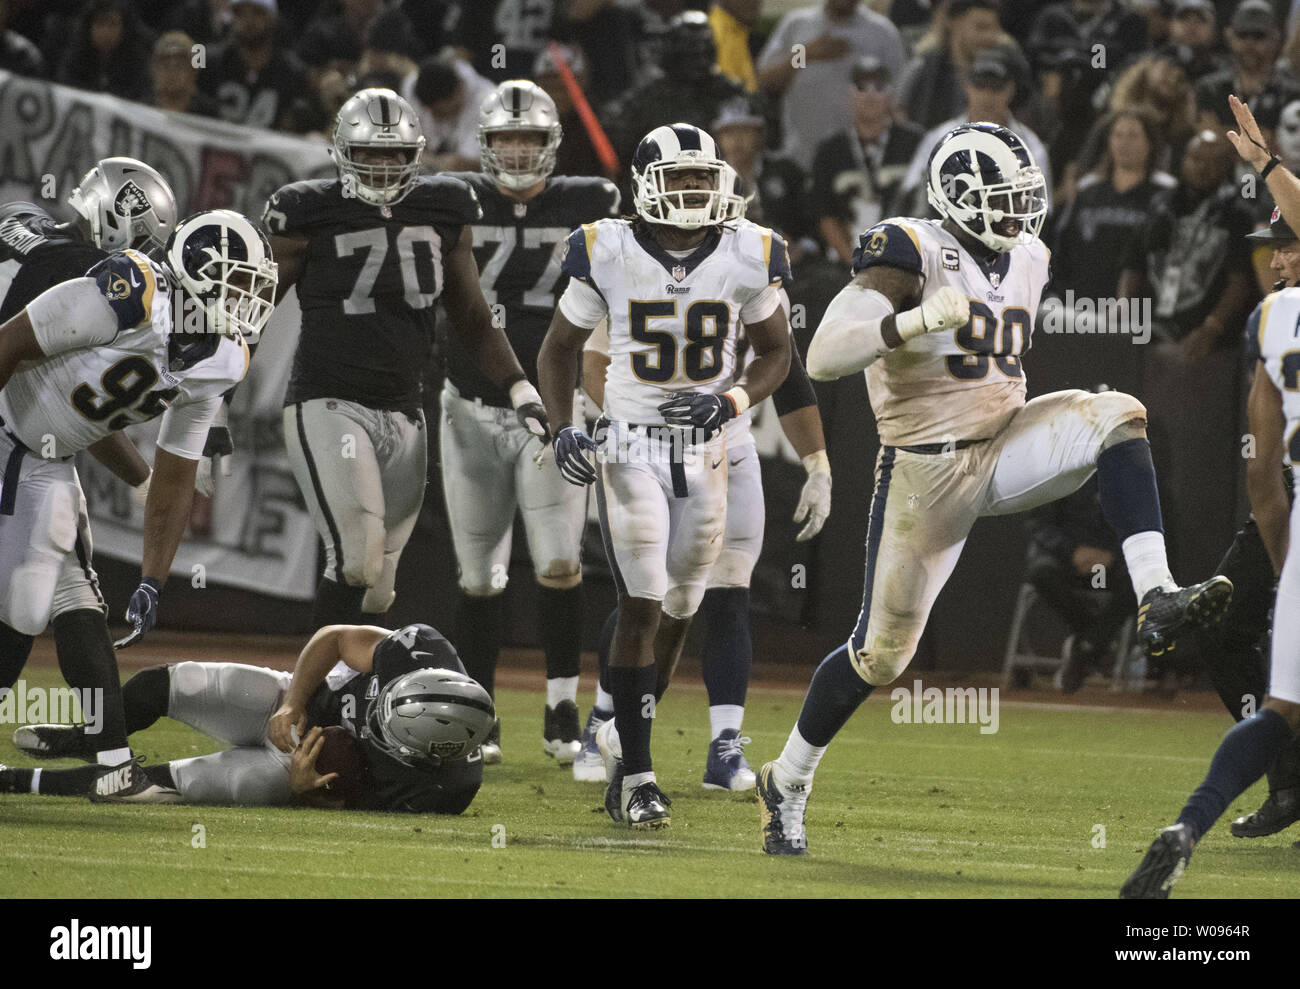 Los Angeles Rams Michael Brockers (90) celebrates sacking Oakland Raiders QB Derek Carr (L) for a loss of three yards in the third quarter at the Coliseum in Oakland, California on Monday, September 10, 2018. The Rams defeated the Raiders 33-13.       Photo by Terry Schmitt/UPI Stock Photo